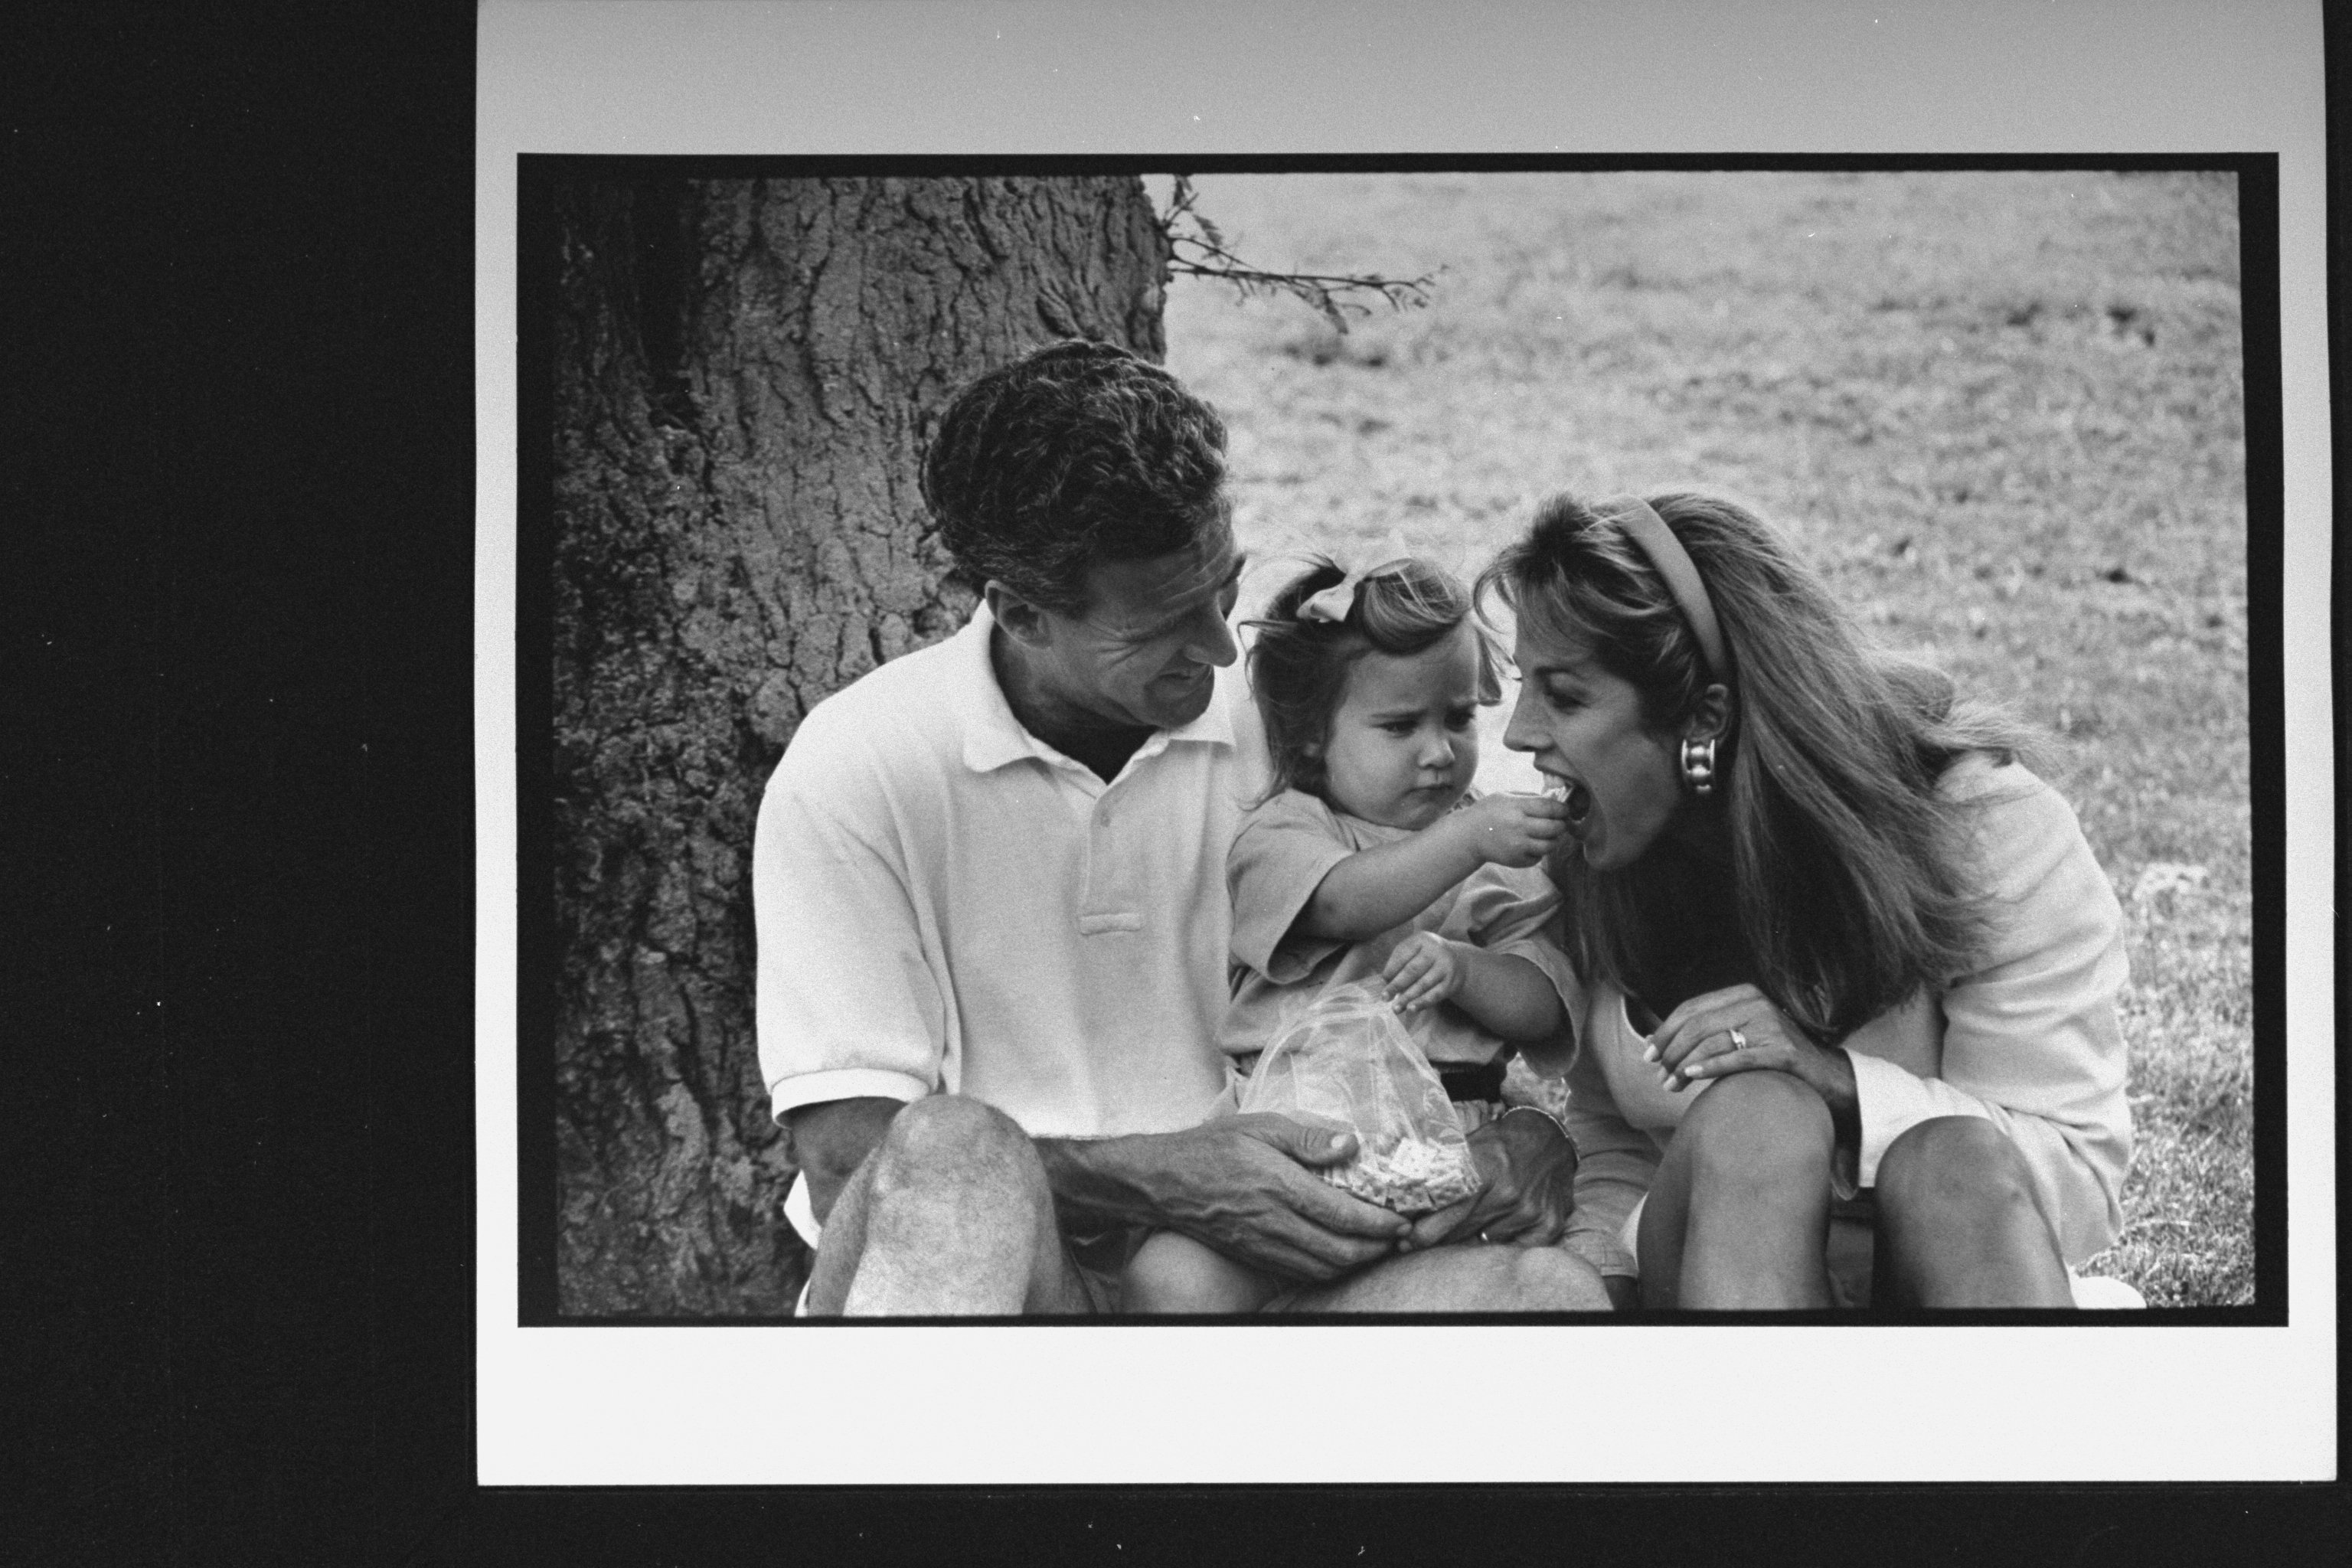 Denise Austin and Jeff Austin are pictured with their 21-month-old daughter, Kelly, who feeds her mother a biscuit as she sat under a tree in a park near their home, June 3, 1992 |  Source: Getty Images